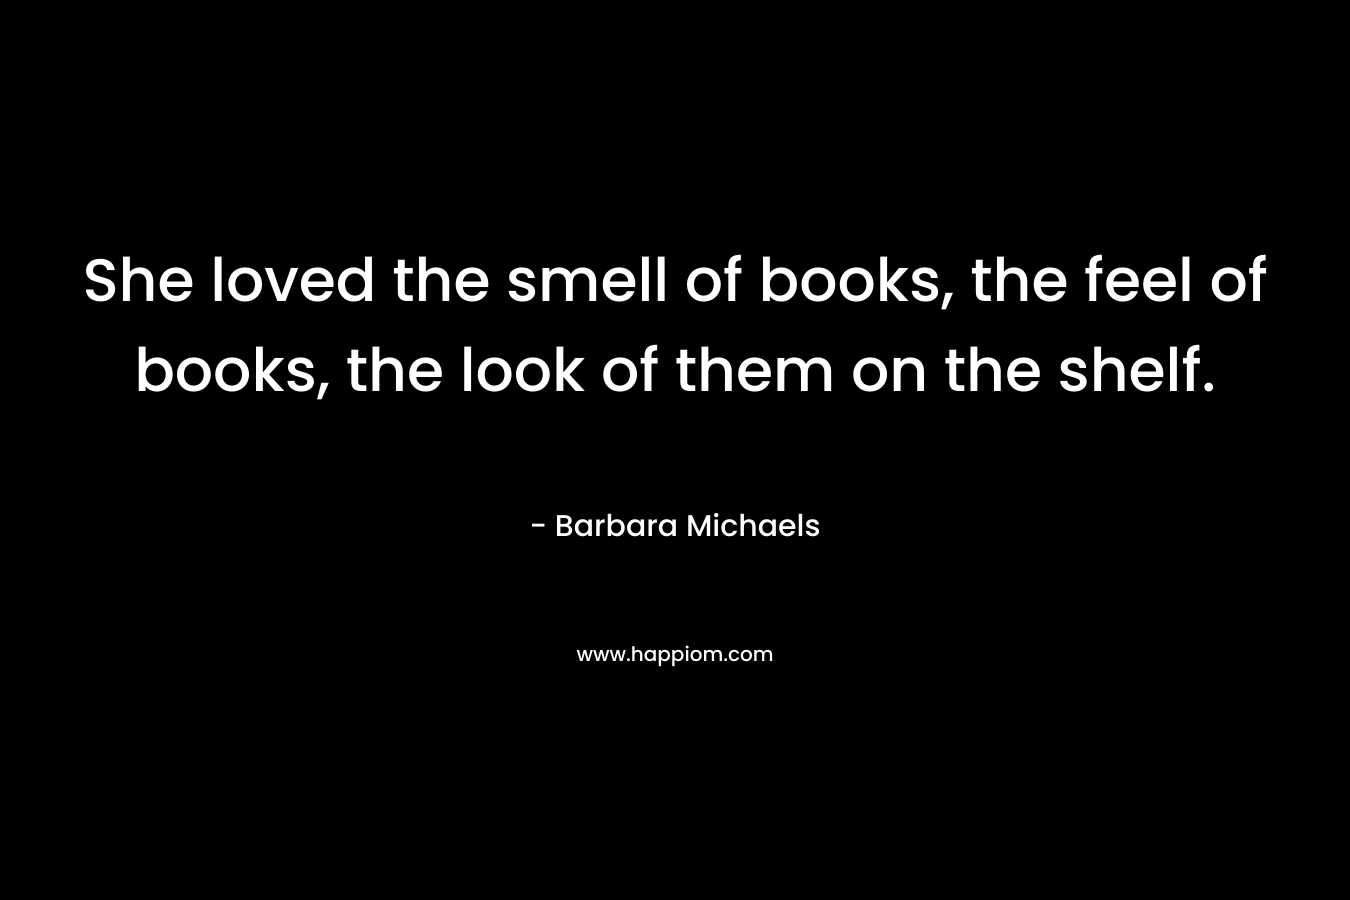 She loved the smell of books, the feel of books, the look of them on the shelf. – Barbara Michaels